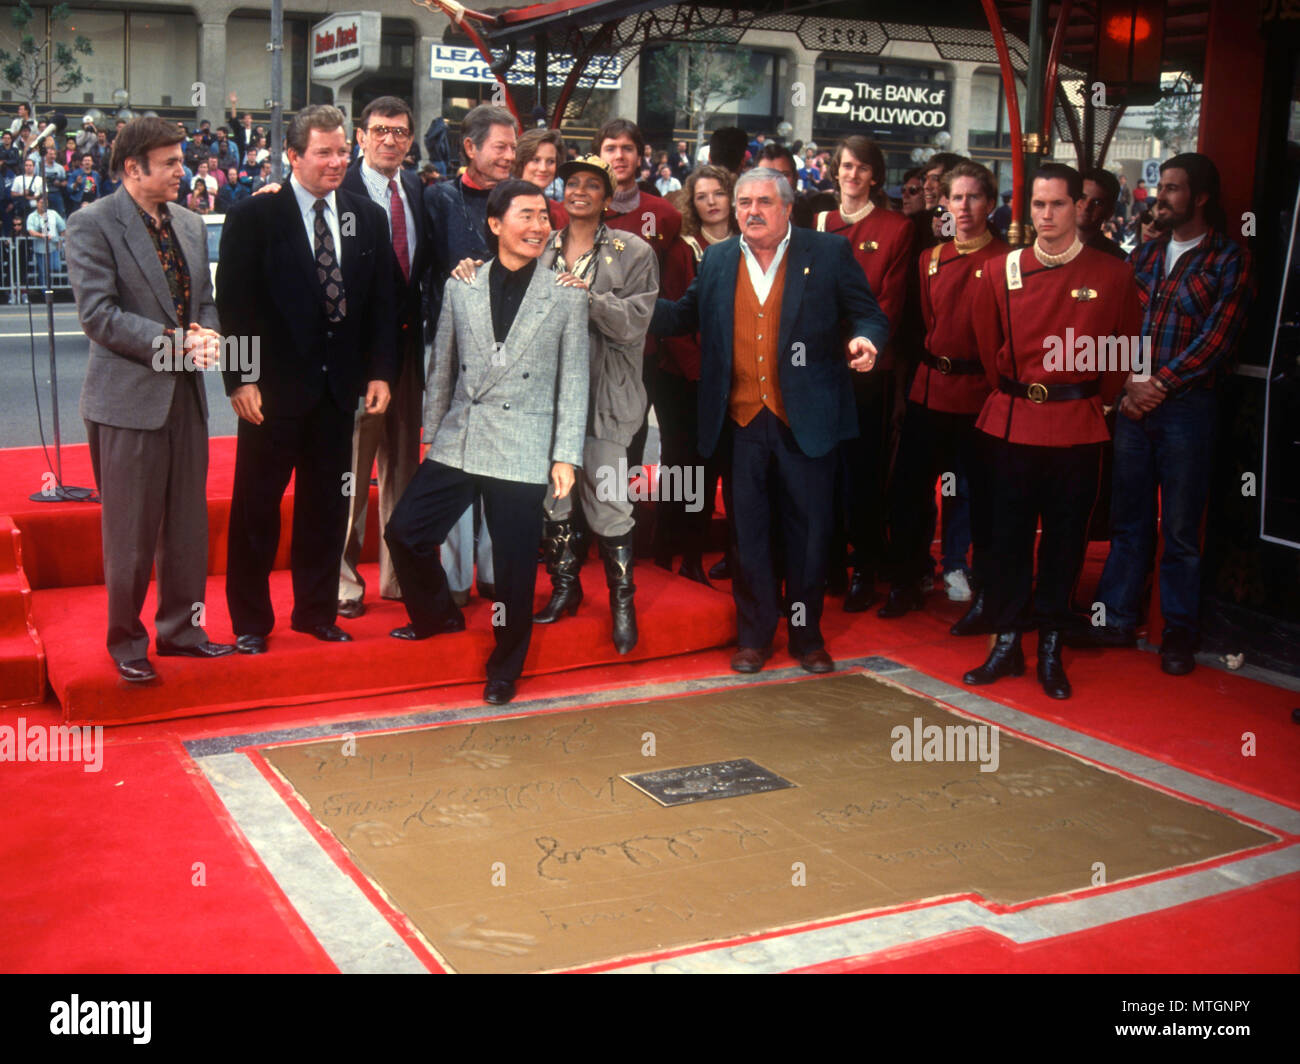 HOLLLYWOOD, CA - JUNE 12: (L-R) Actors Walter Koenig, William Shatner, Leonard Nimoy, DeForest Kelley, George Takei, Nichelle Nichols and James Doohan attend The Cast of 'Star Trek' Hand and Footprint Ceremony on June 12, 1991 at Mann's Chinese Theatre in Holllywood, California. Photo by Barry King/Alamy Stock Photo Stock Photo